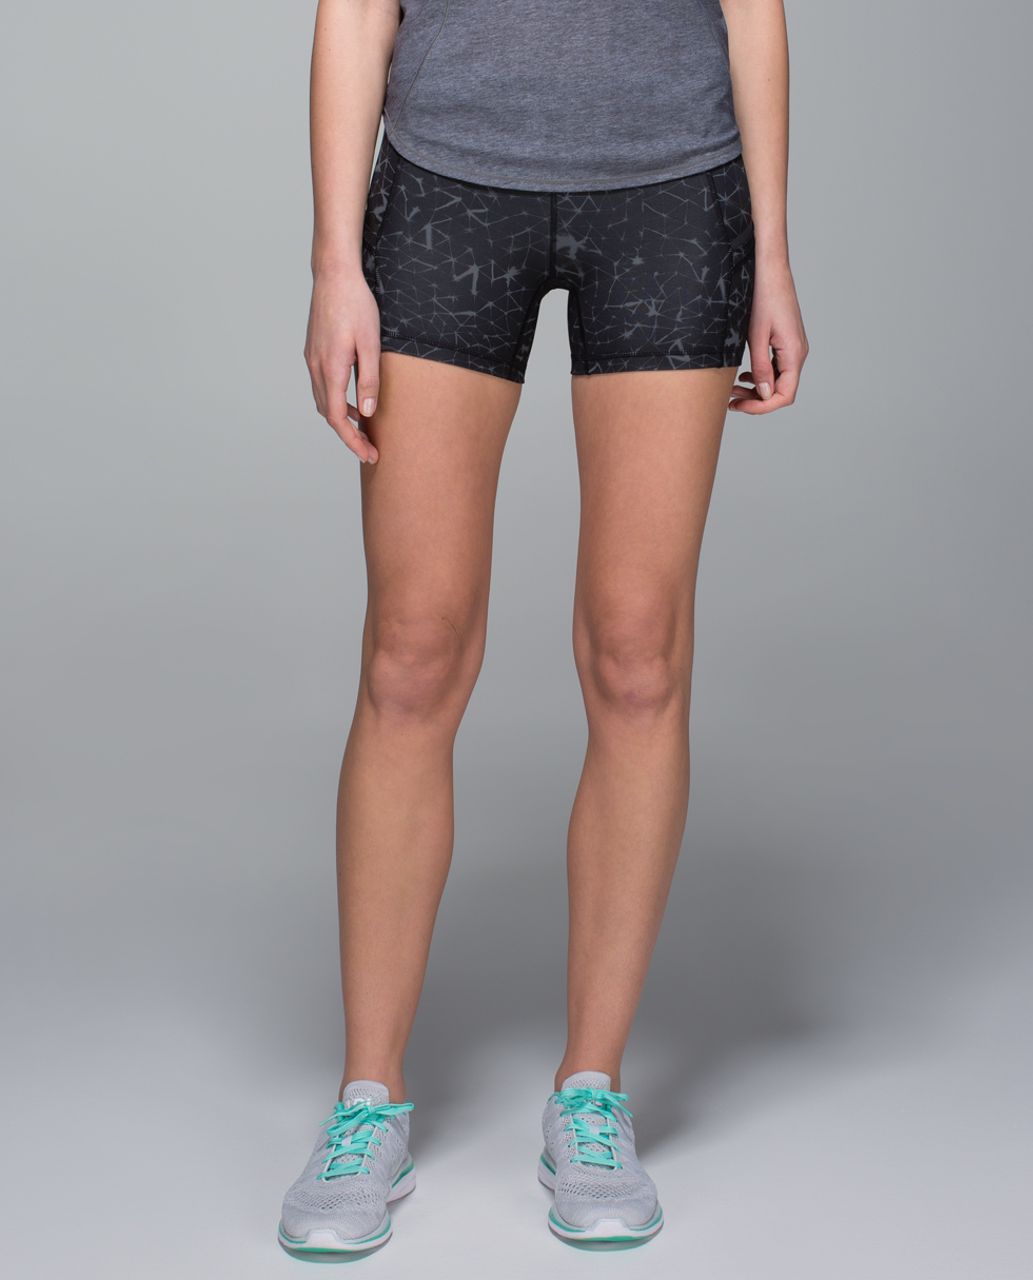 Lululemon What The Sport Short *Full-On Luxtreme - Star Crushed Coal Black